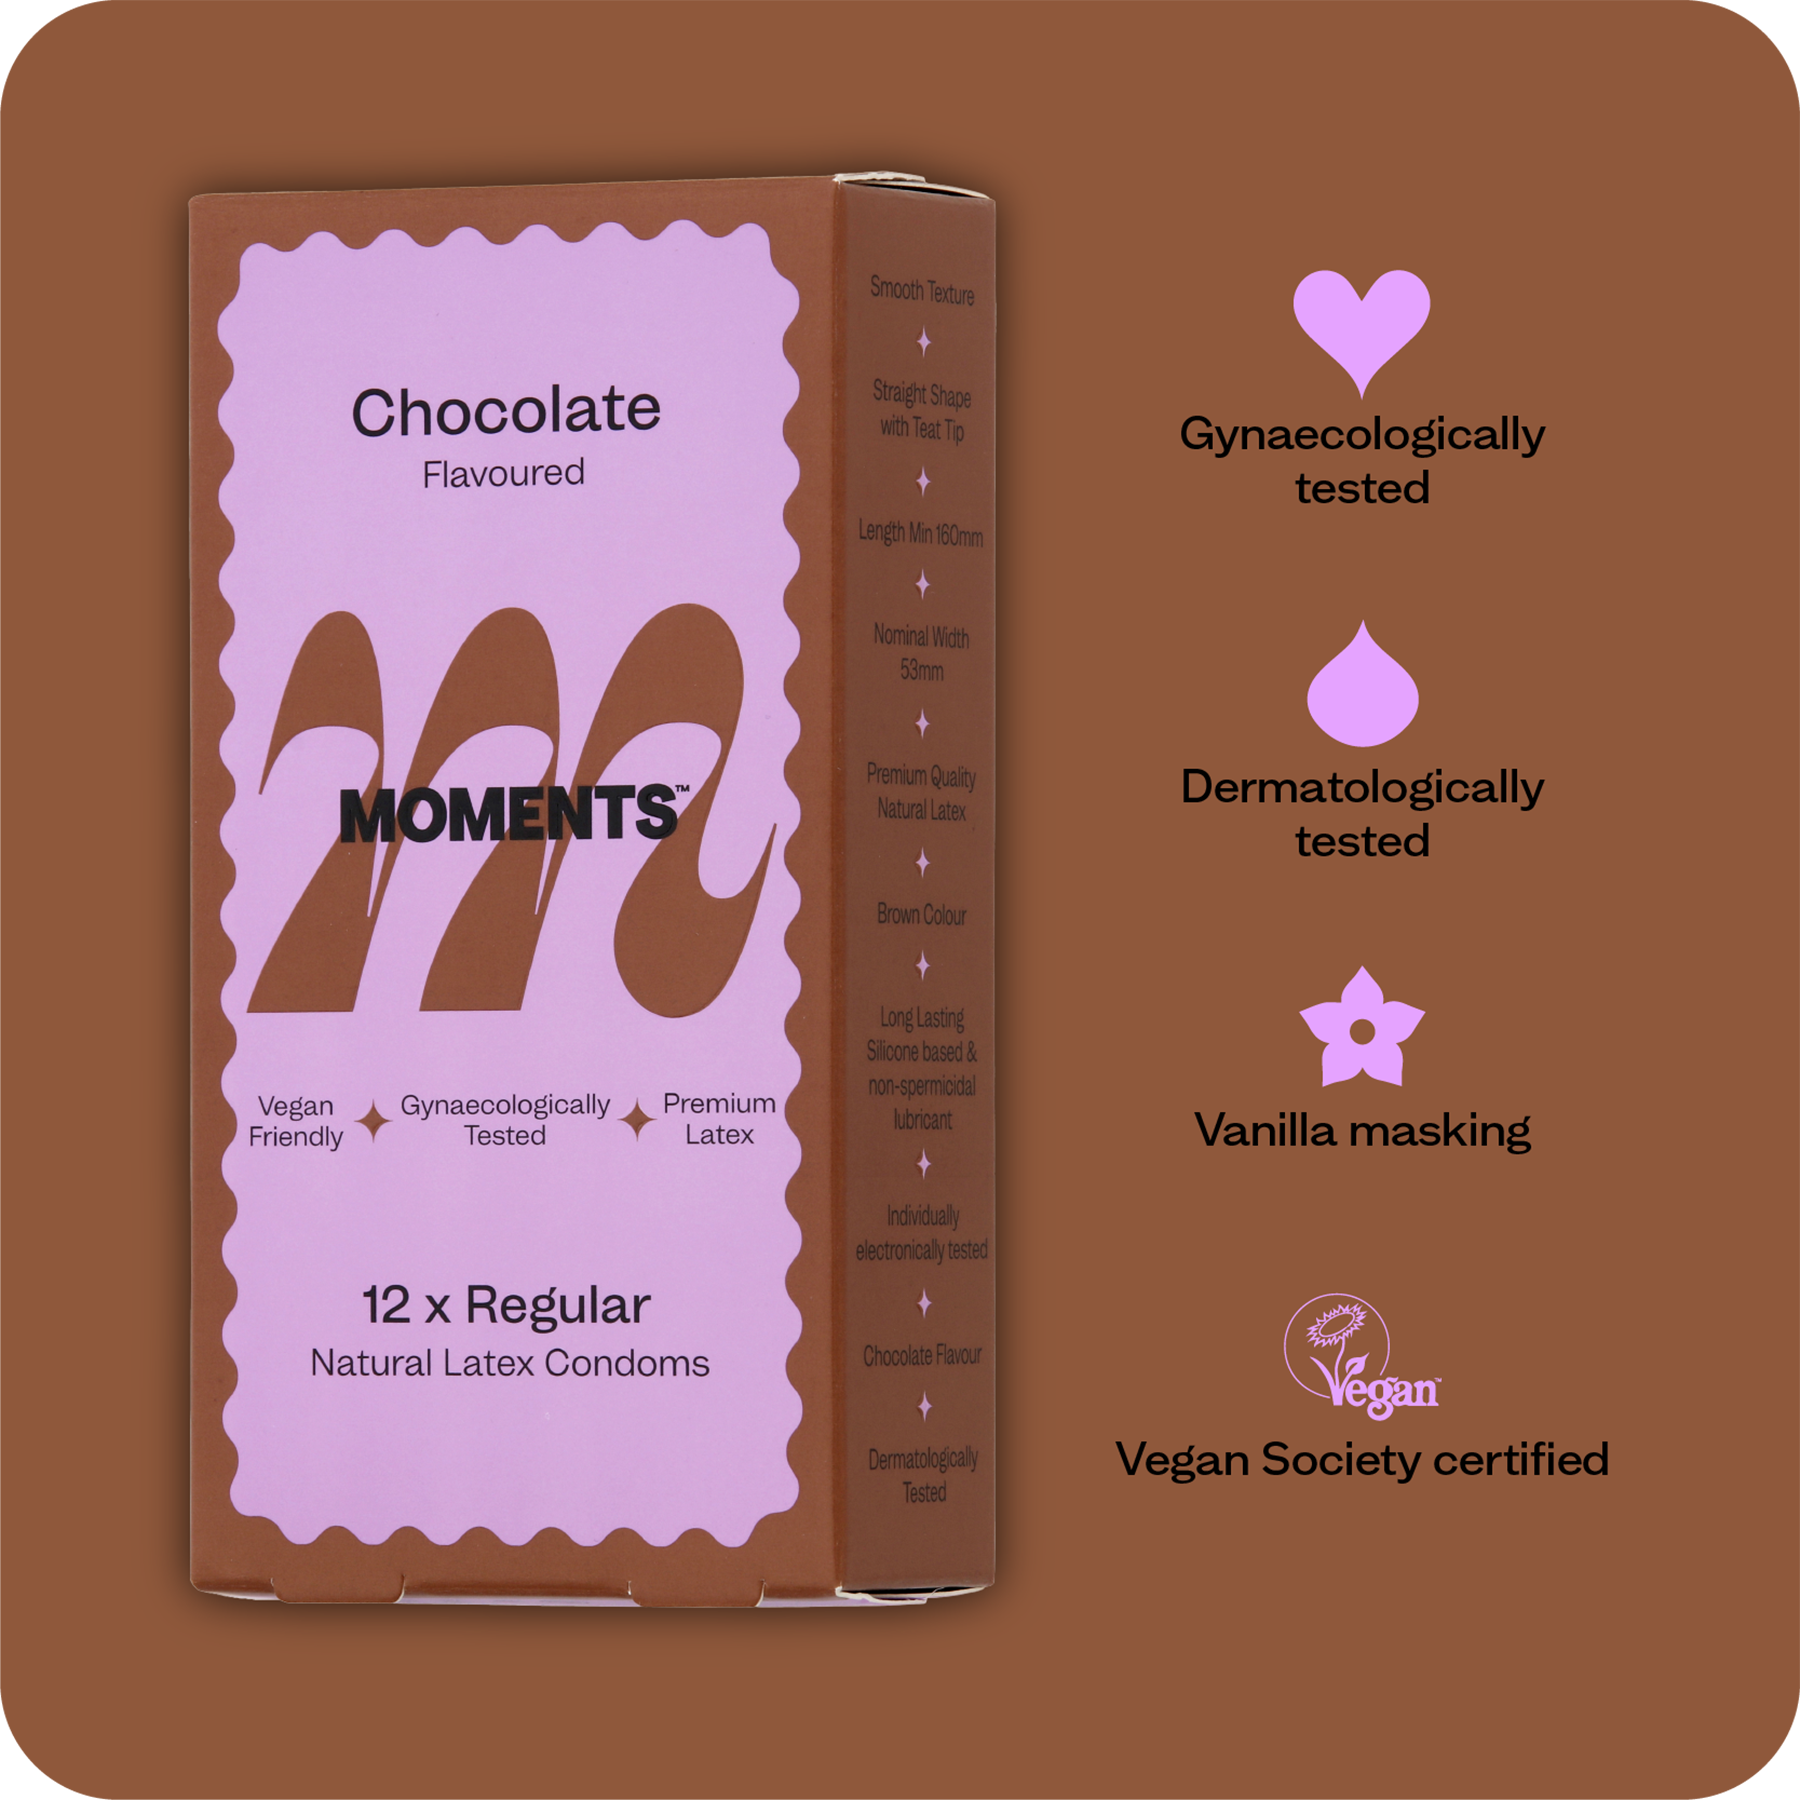 USP for Moments chocolate flavoured condom